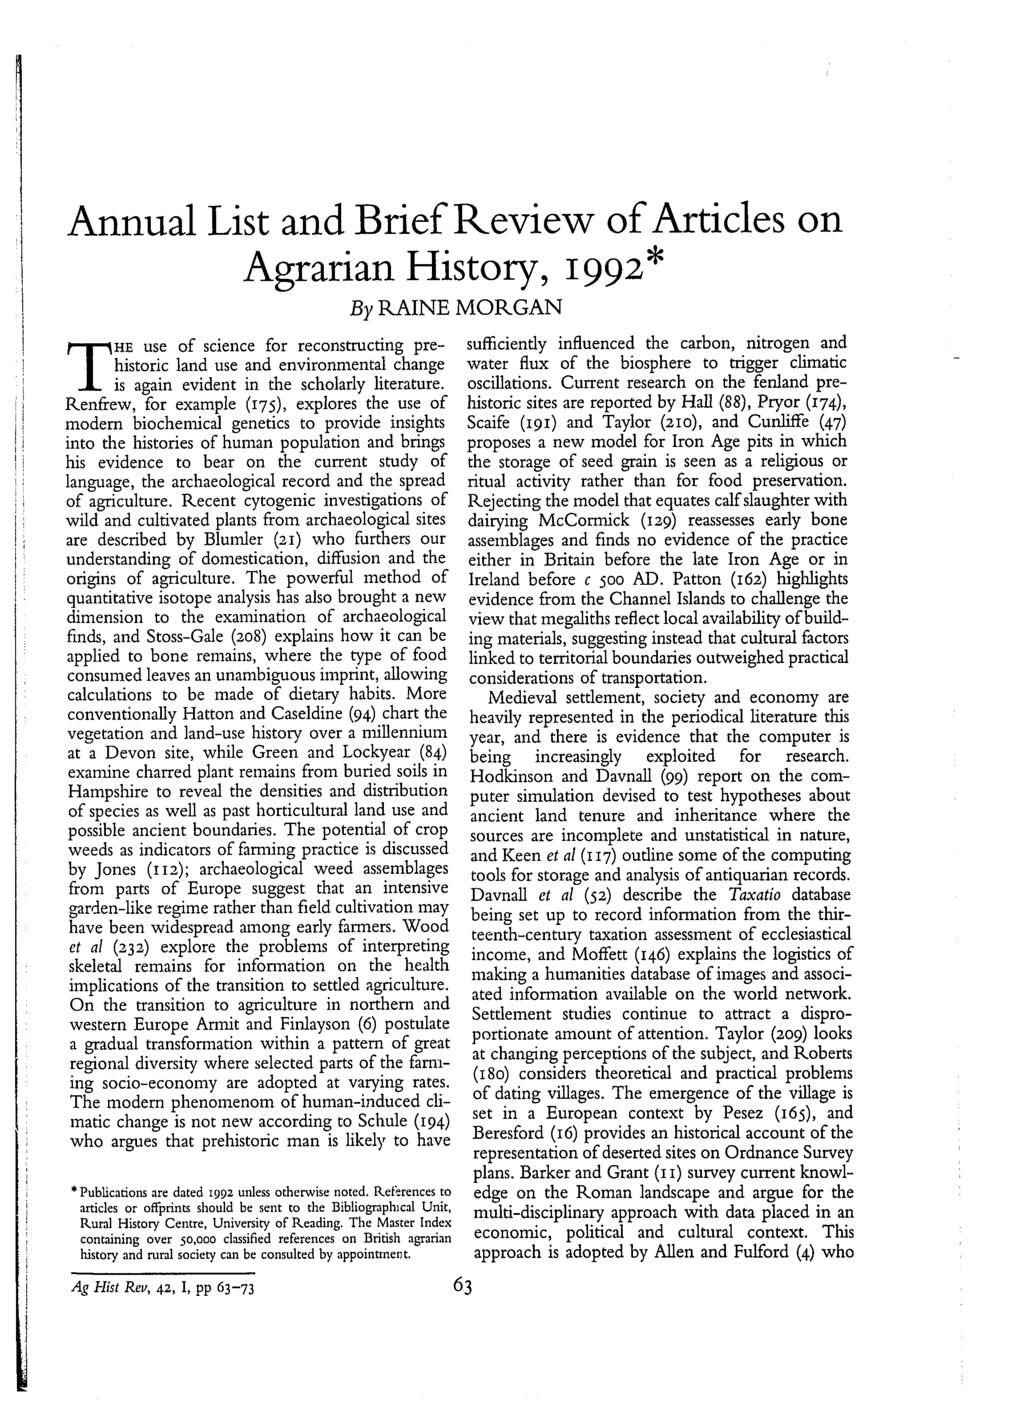 Annual List and Brief Review of Articles on Agrarian History, 1992" By IKAINE MORGAN T I~E use of science for reconstructing prehistoric land use and environmental change is again evident in the